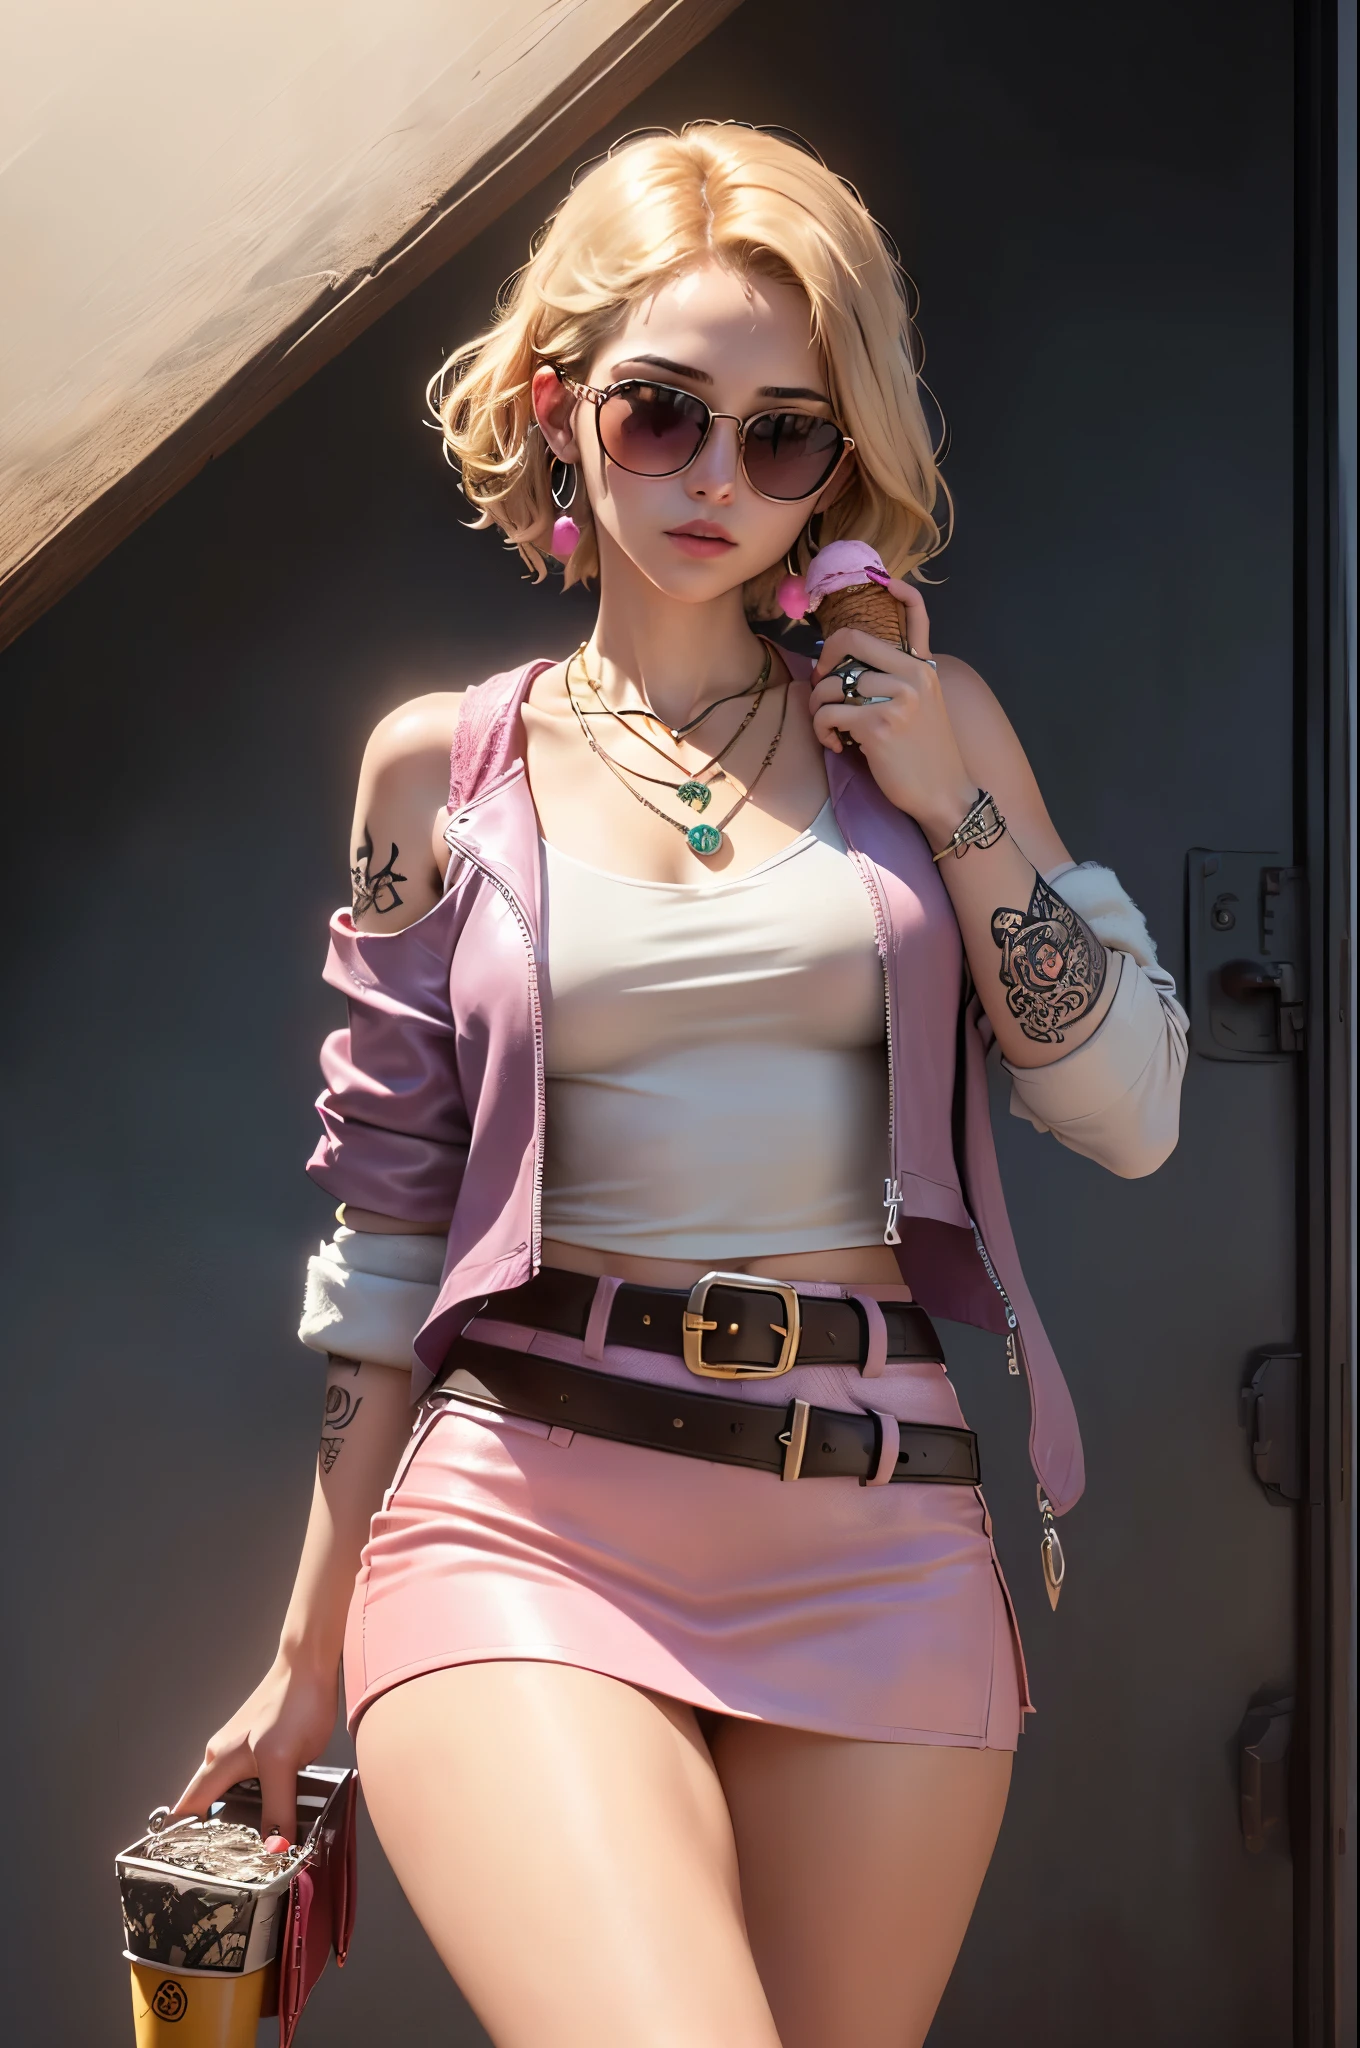 The best possible quality, Ultra 8K resolution, impressive illustration, the best of everything, award-winning, How to be the best, ((short blonde hair, shaved on the side with a black tattoo, leather belt with buckle, an ice cream in hand, Model pose, Add effect at the end, pink leather jacket, long neck scarf, sunglasses, long painted nails, decorative accessories, hoops, rings, necklace:1.6)), (modern light pink short skirt: 1.6 ), ((pink, brown, white colors: 1.5)), epic desert setting: 1.5, photorealistic: 1.4, skin texture: 1.4, super masterpiece, super detailed, hyper detailed, 32k